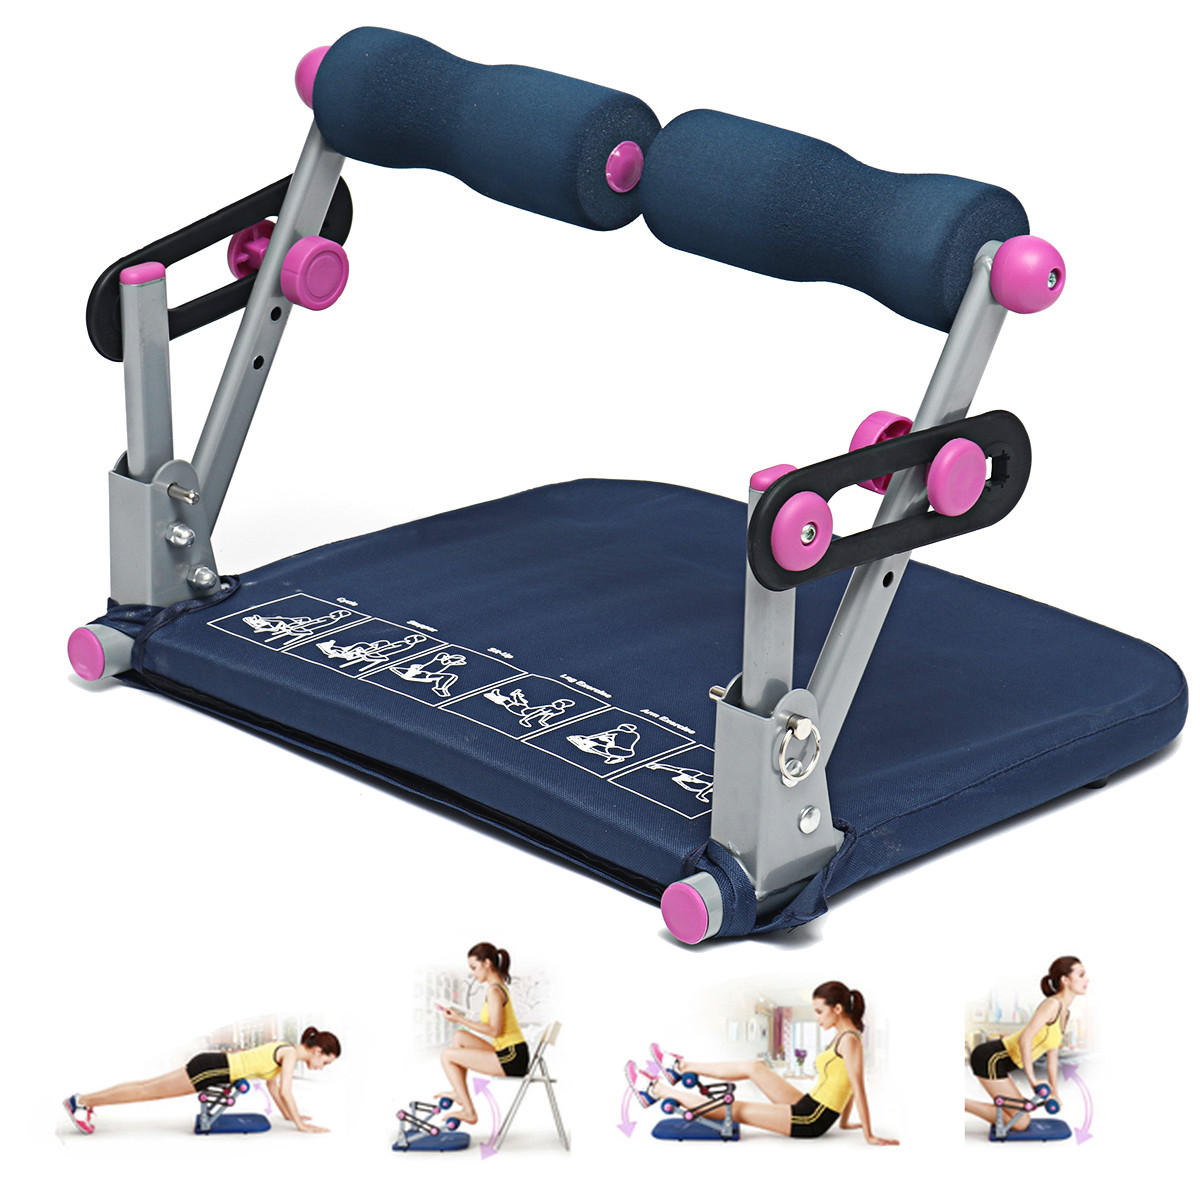 ProTeq Ab Sit-ups Fitness Abdominal Muscle Exercise Tools Sport Machine Home Gym Trainer Equipment